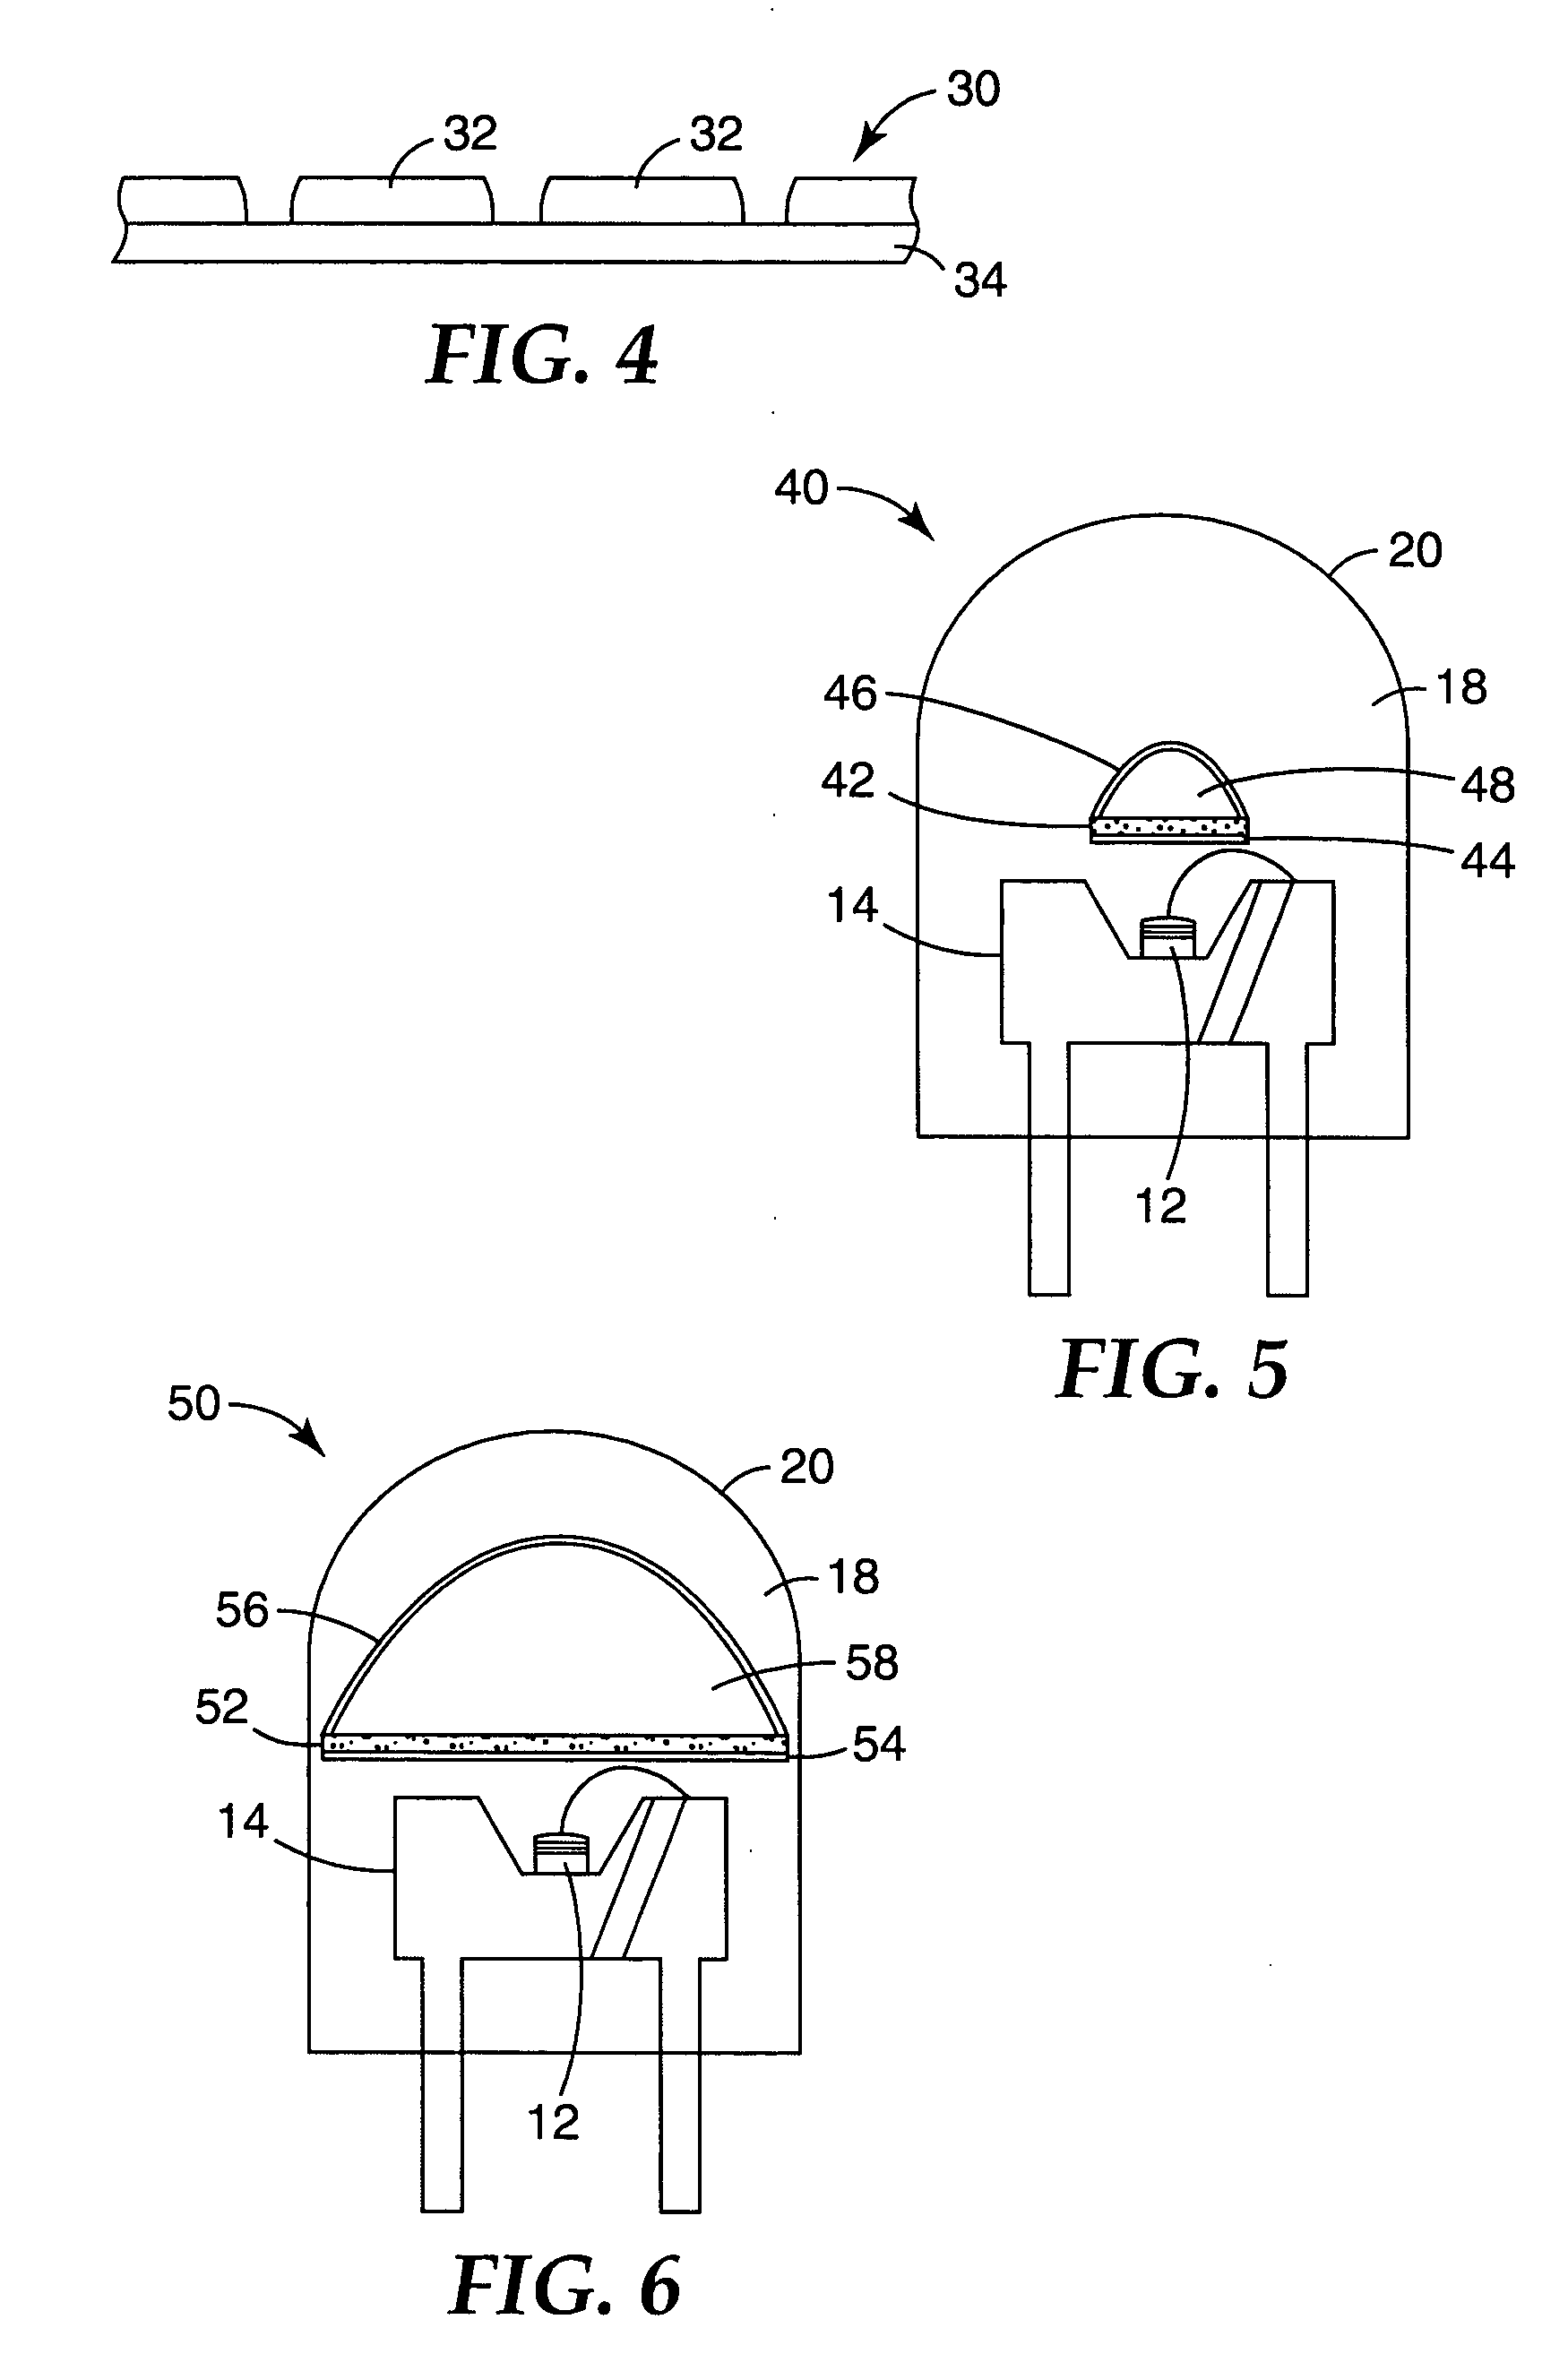 Phosphor based light sources having a non-planar long pass reflector and method of making